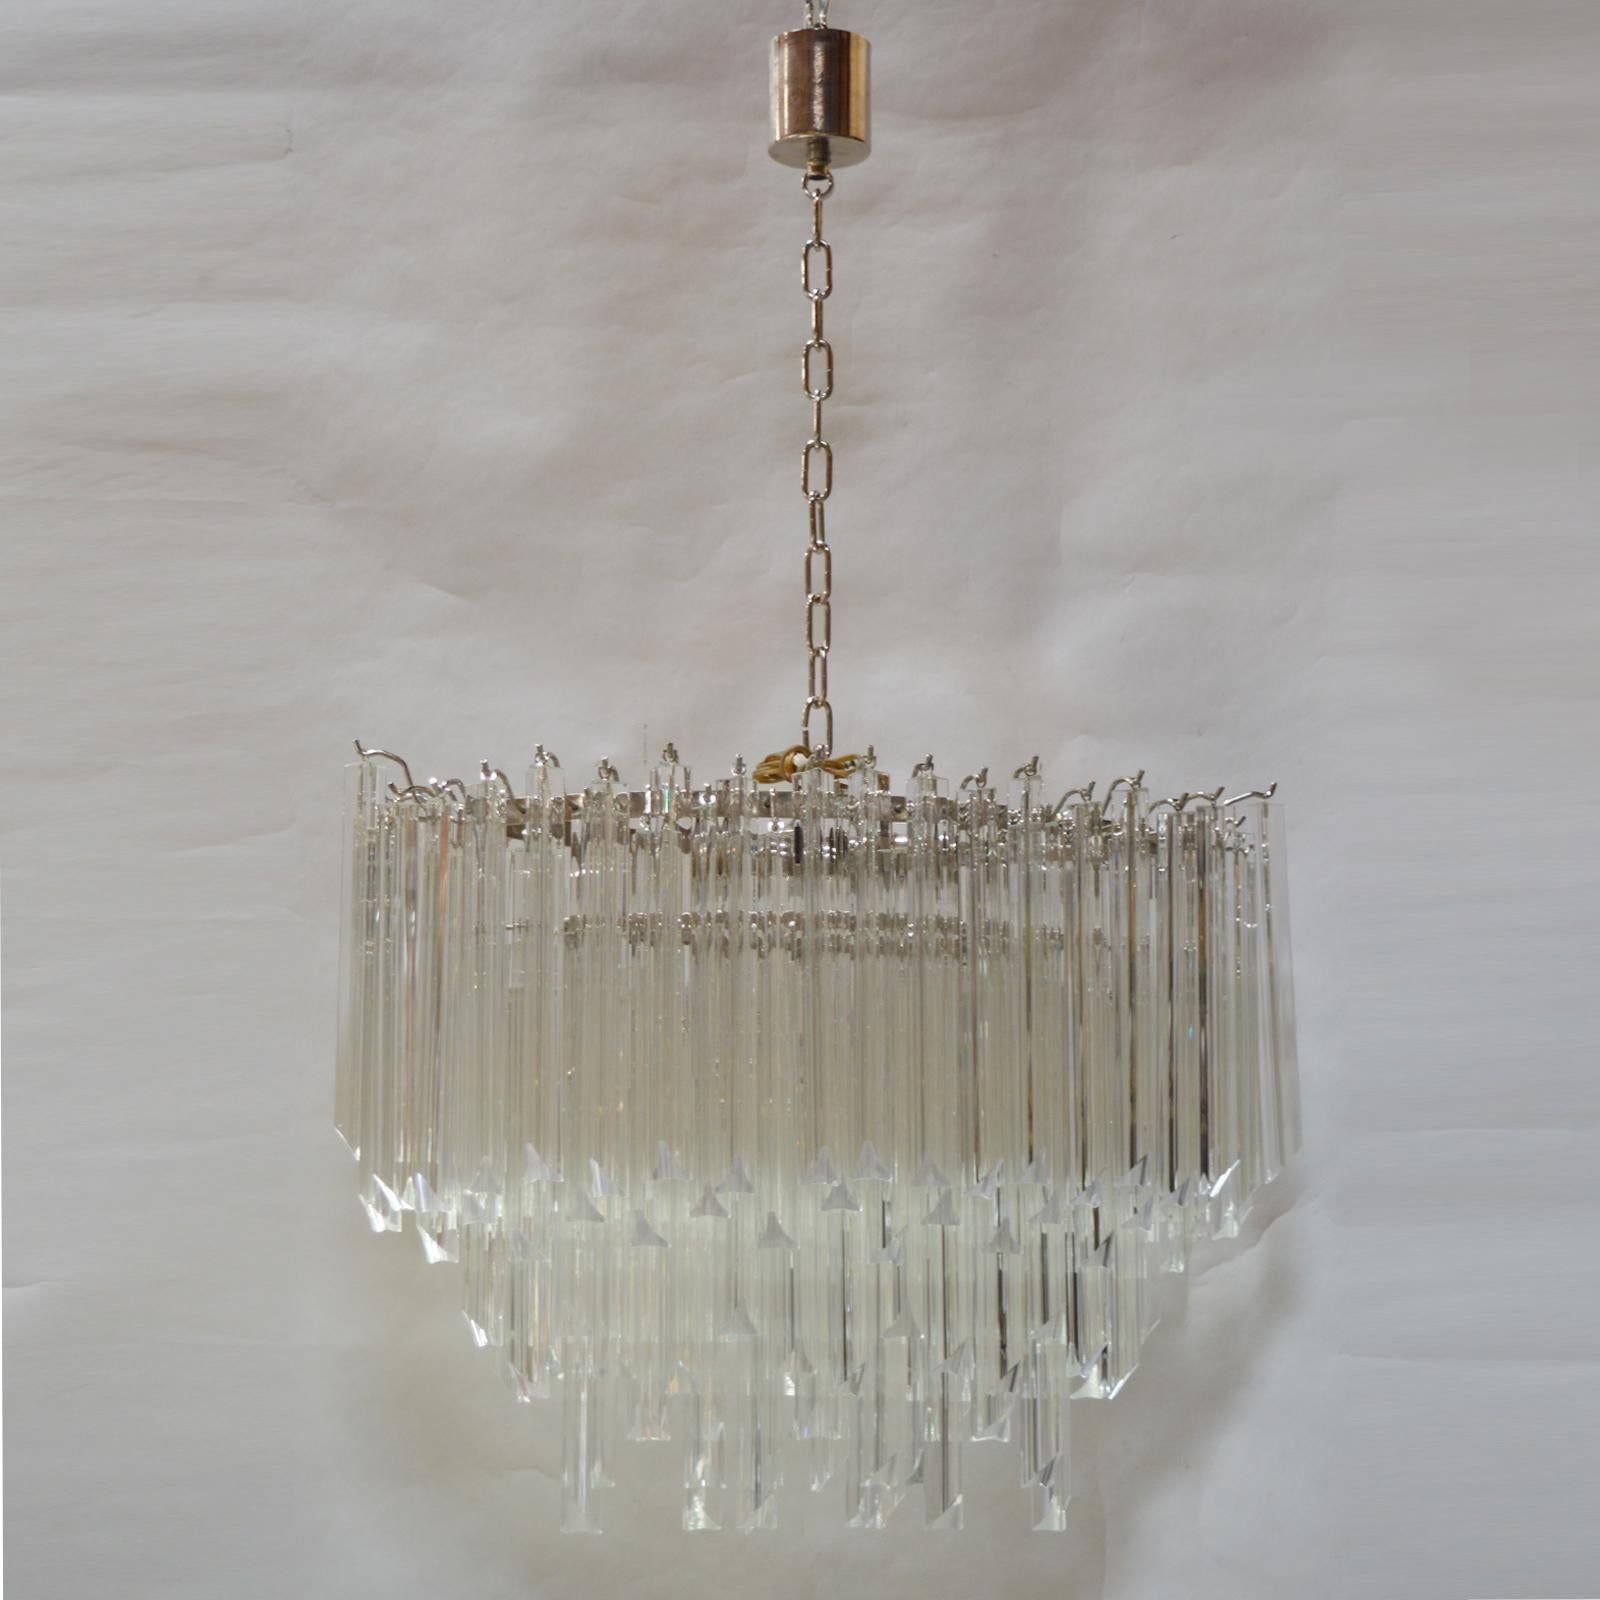 Venini, tiered glass chandelier. Italy, 1970s.